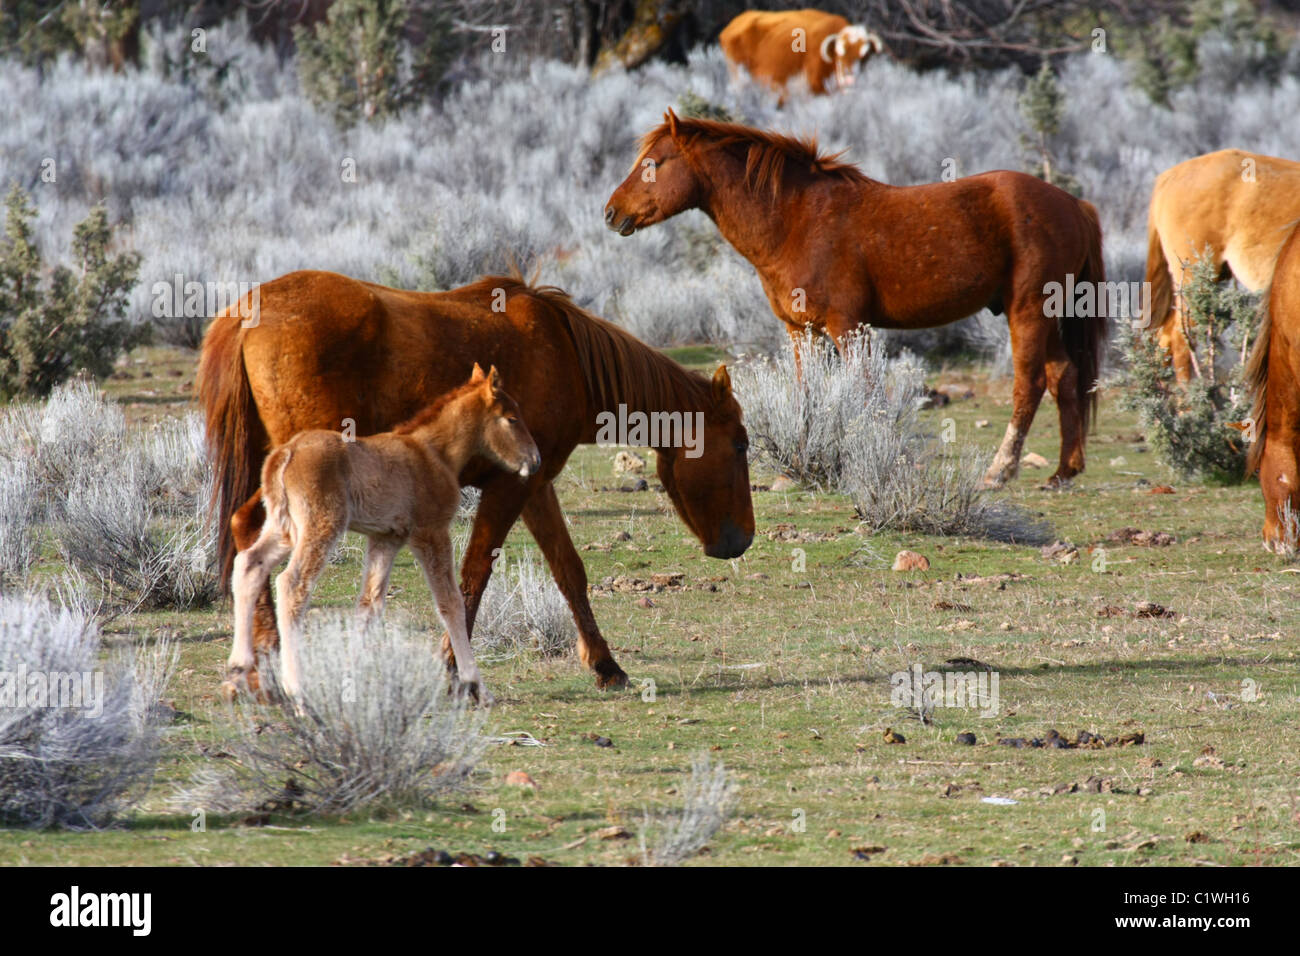 40,600.03289 Two horses and a colt grazing in a high desert grass and sagebrush meadow, with a Hereford bull standing in the background. Stock Photo